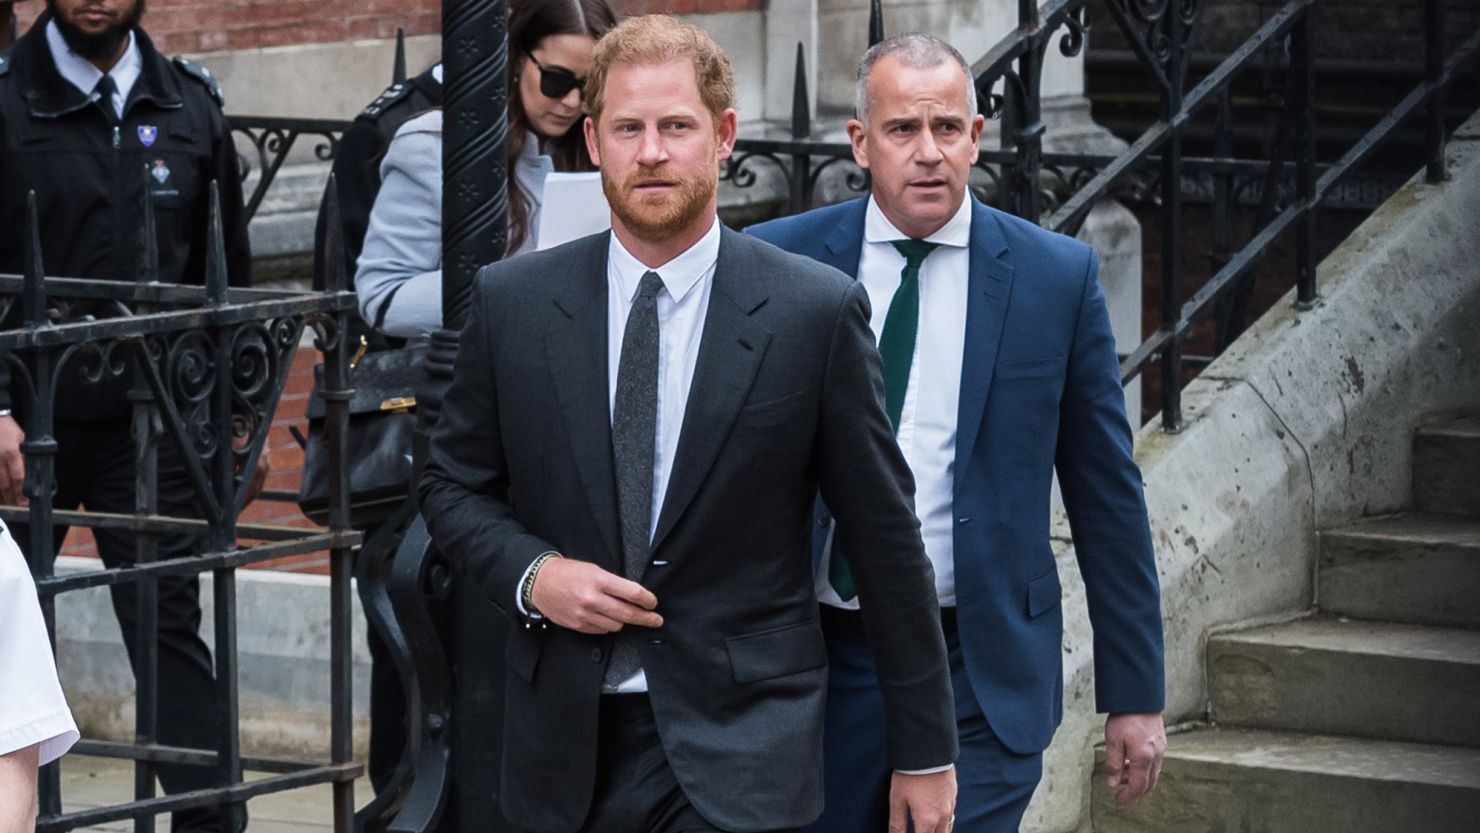 The Duke of Sussex leaves the UK High Court after attending the fourth day of the preliminary hearing in a privacy case against Associated Newspapers Limited, the publisher of the Daily Mail, over alleged phone-tapping and privacy breaches on March 30, 2023. 